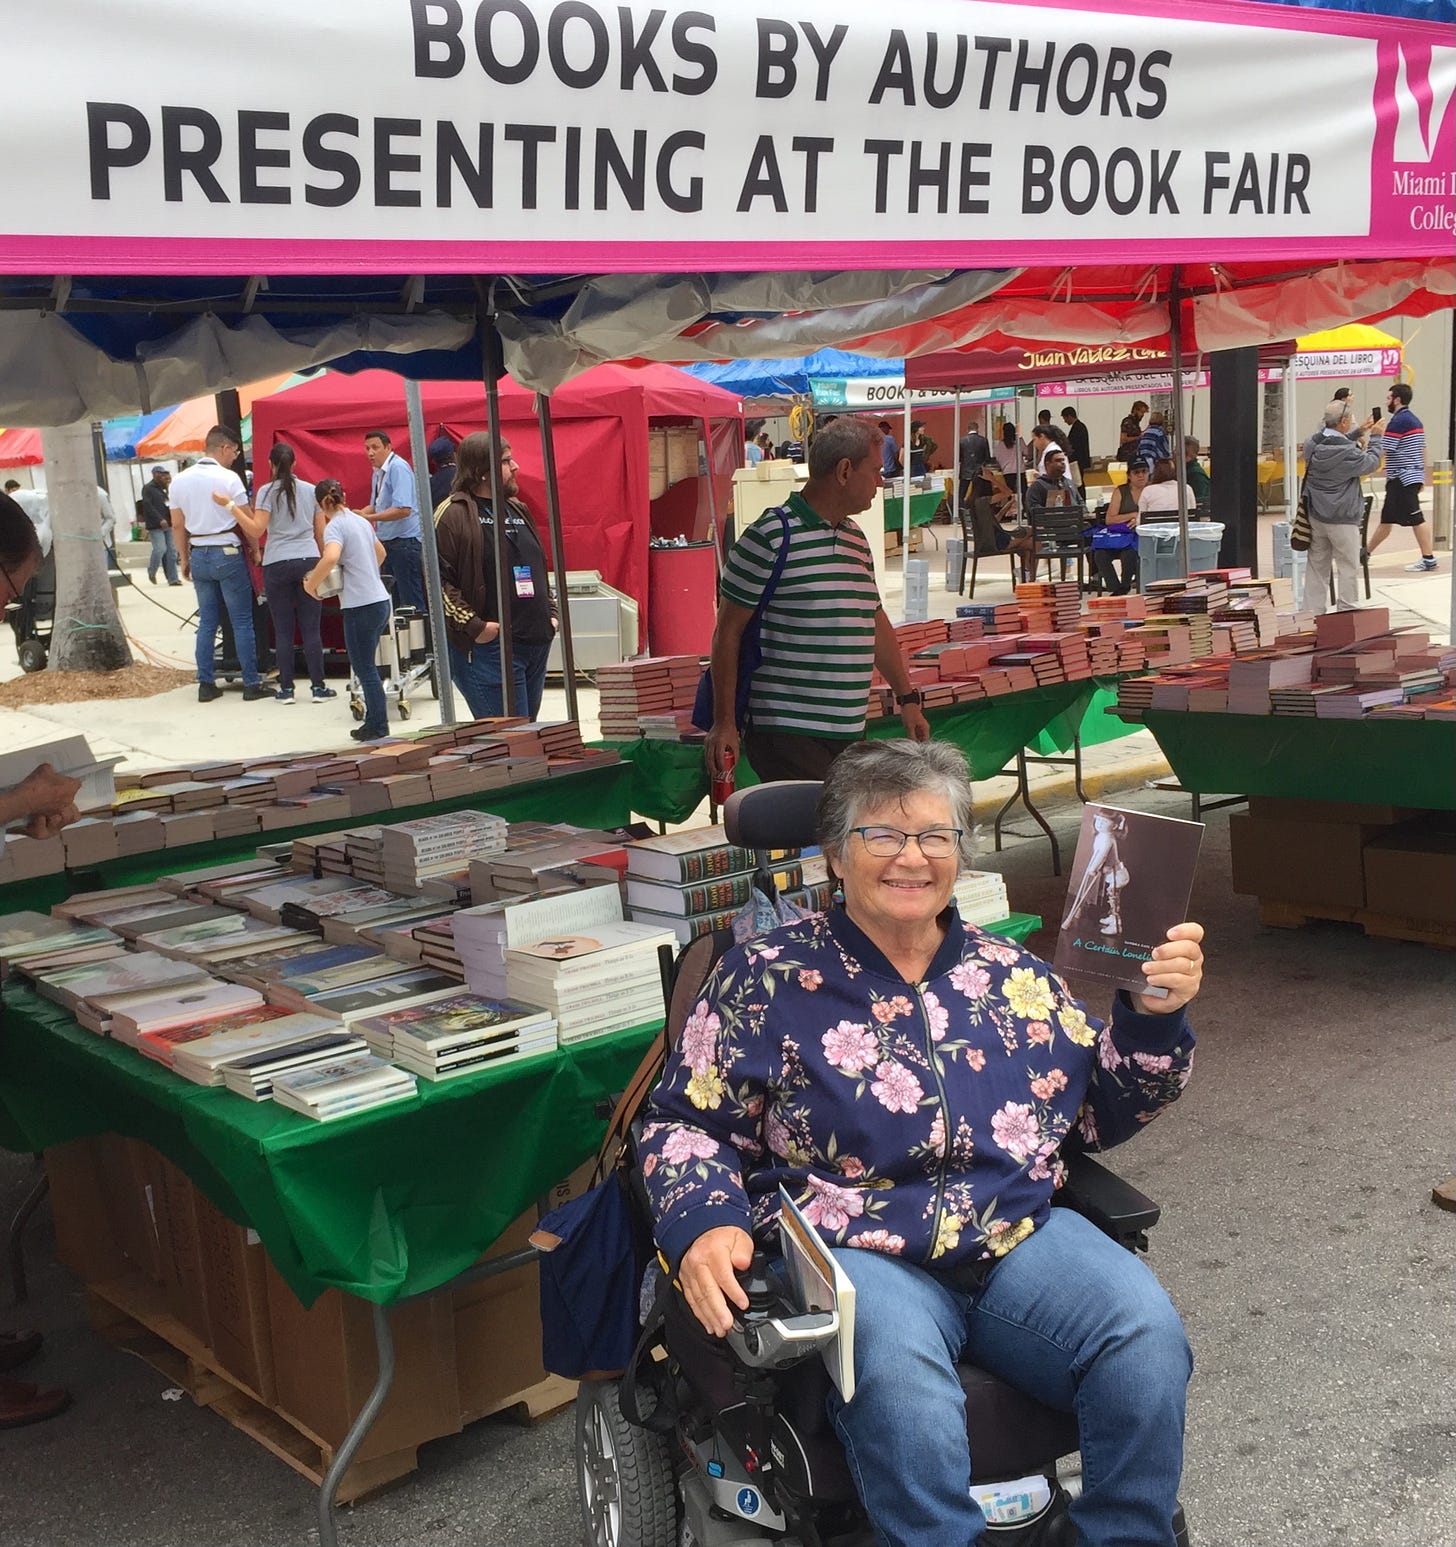 A white woman in a flowered jacked seated in her power chair holding up a copy of her memoir A Certain Loneliness. She is in front of an outdoor book stall with a banner over it that says "Books by Authors Presenting at the Book Fair." 